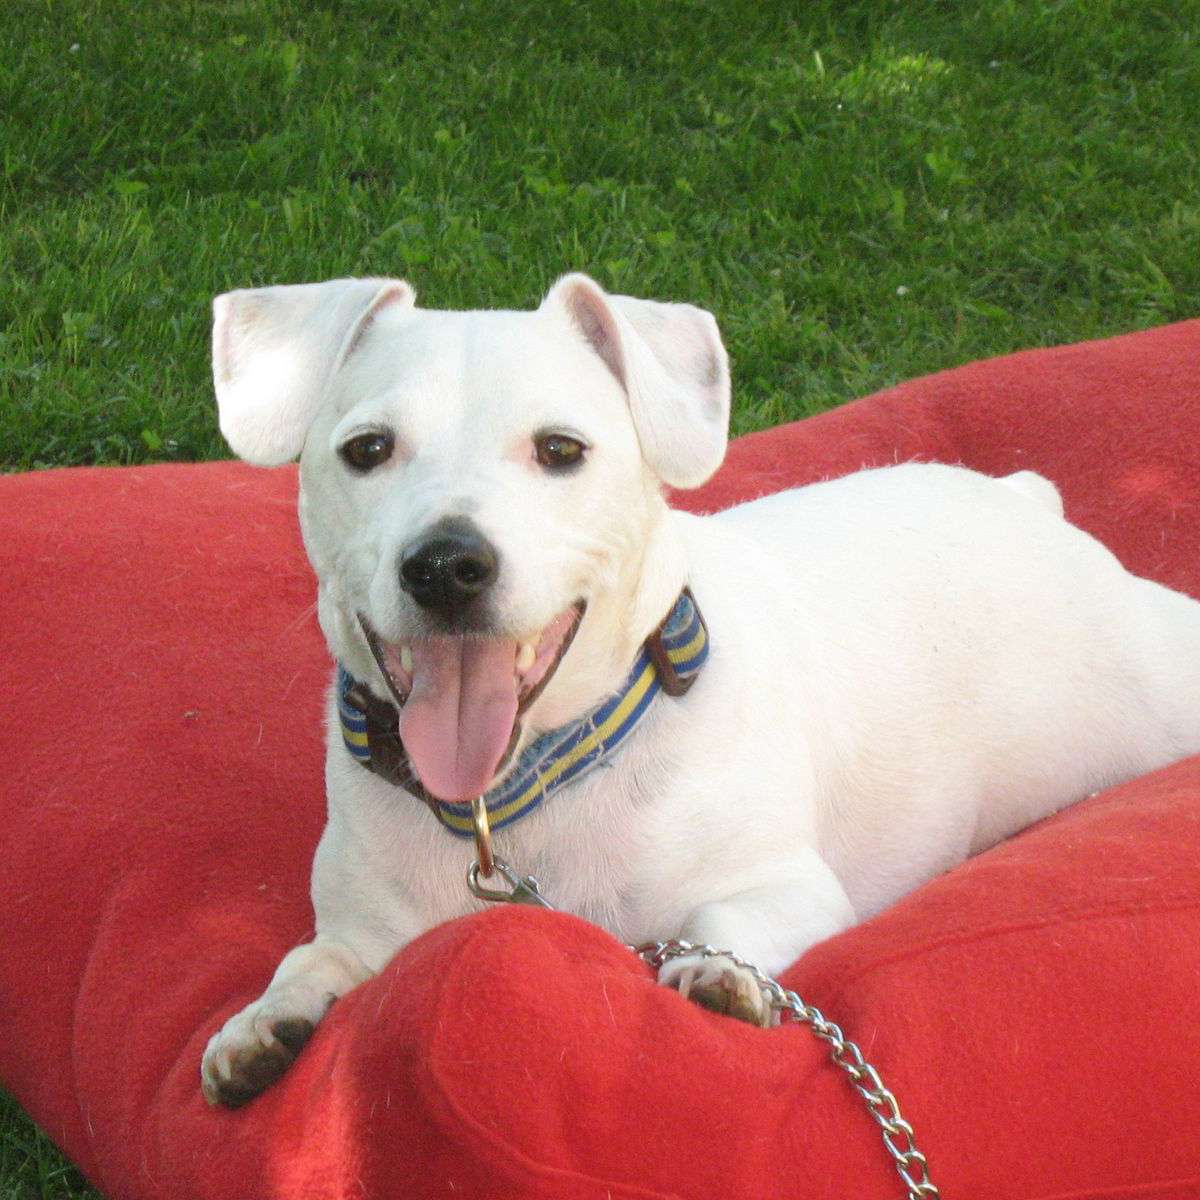 Kojo sitting on his red cushion in the grass